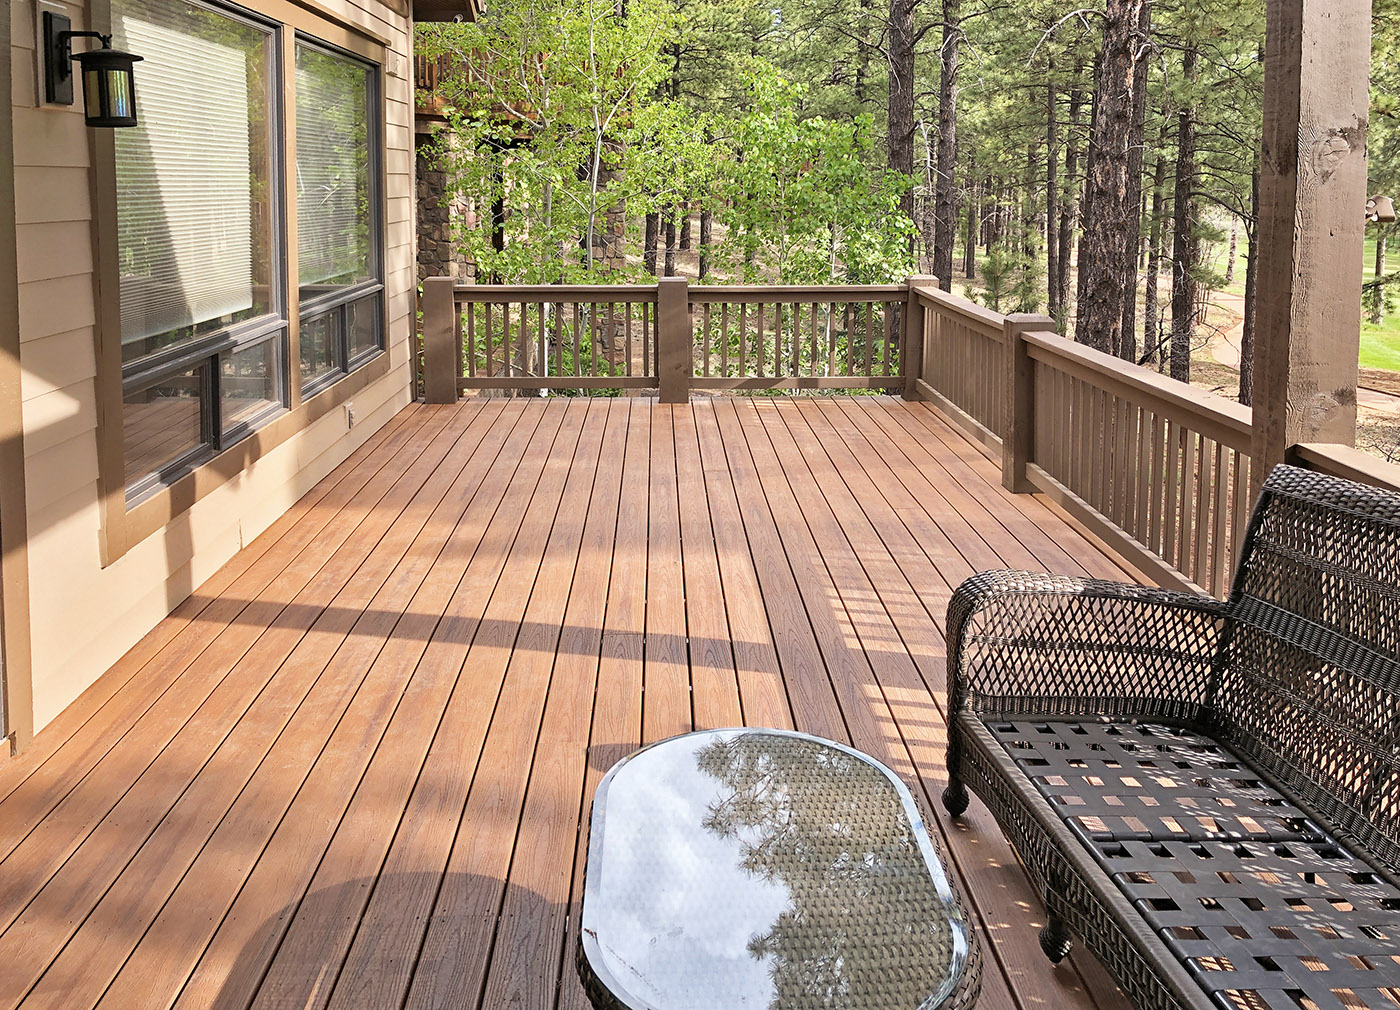 Trex Transcends decking with wood handrails made from 8x8 posts